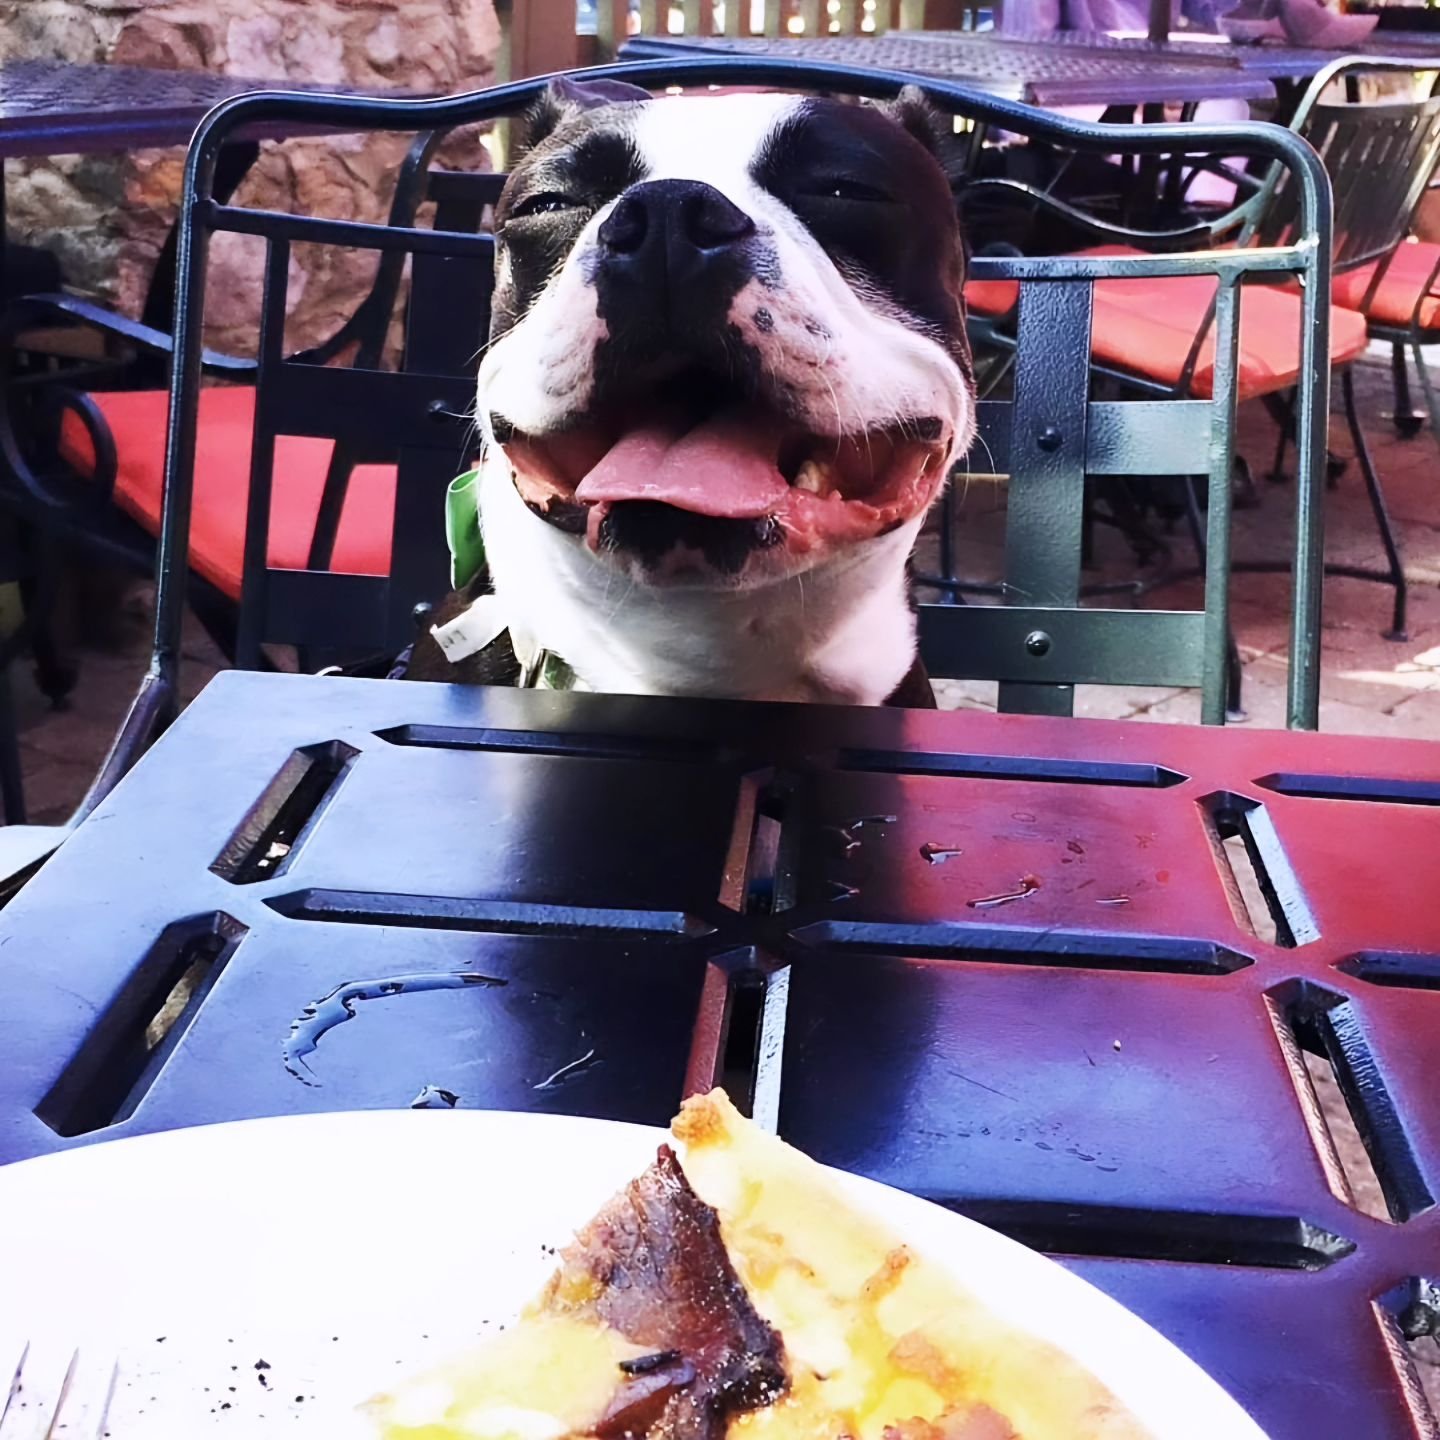 All smiles because the weekend has arrived! 😍

Did you know that our patios are dog 🐕 friendly? That's right! Bring your fur-legged pals and visit one of our locations today and start the weekend with us! We look forward to seeing you! We open at 1